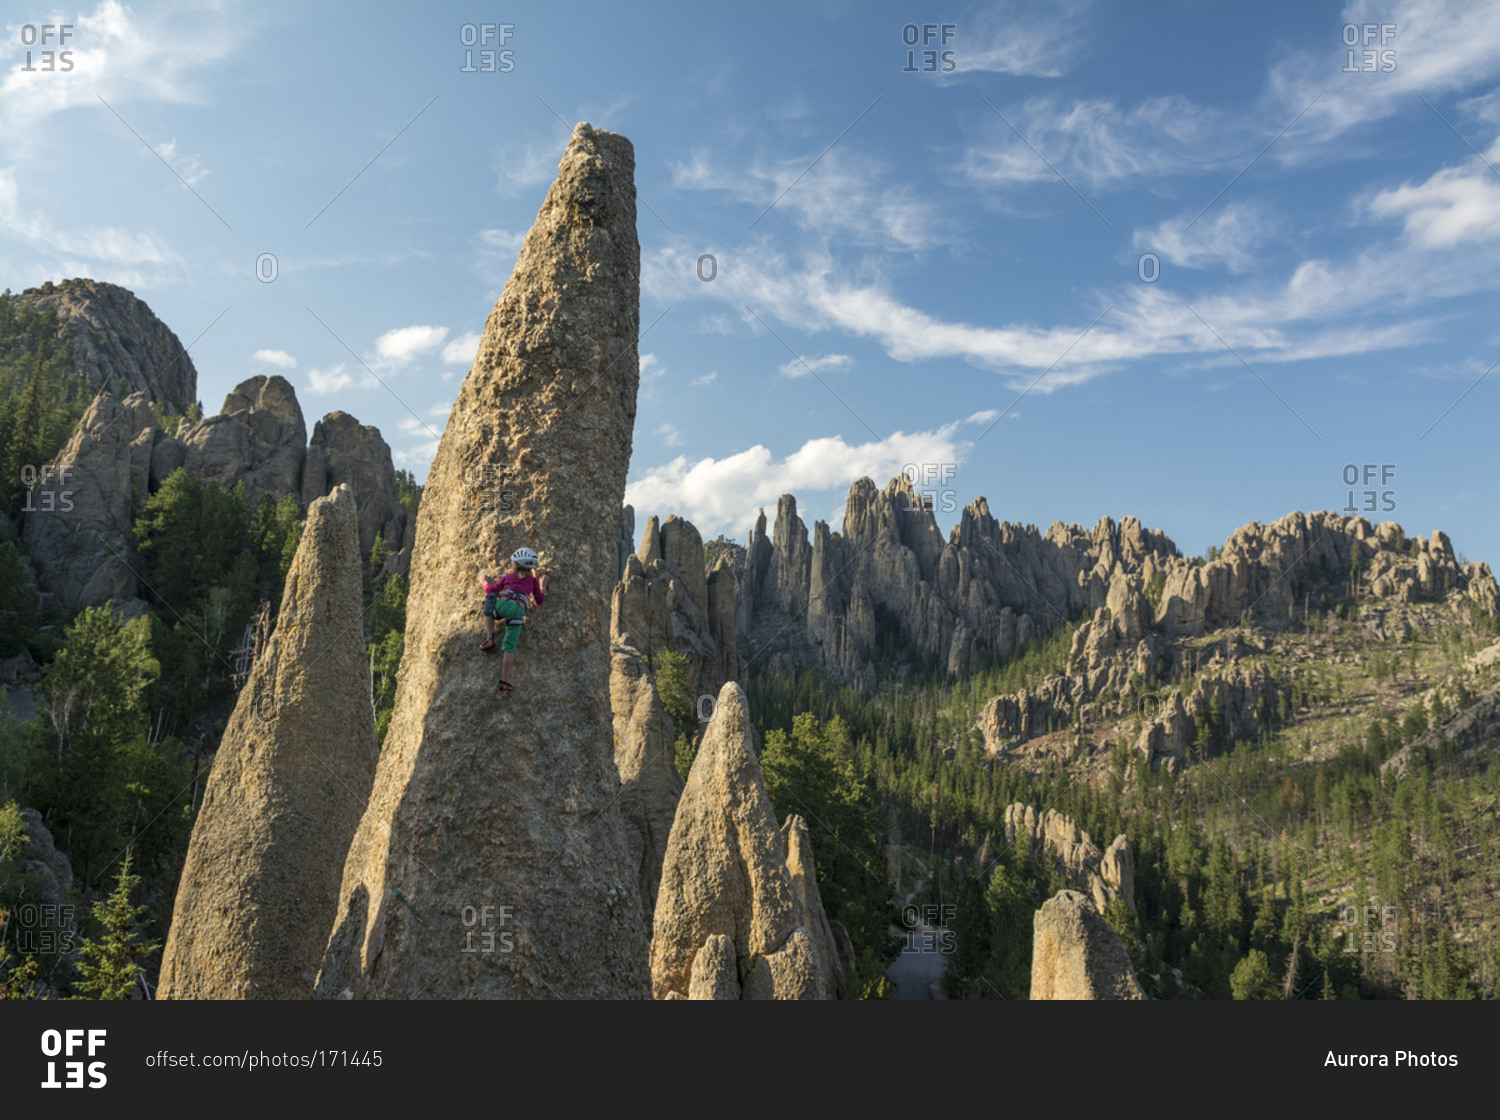 A young girl rock climbing in the Black Hills, Custer State Park, Hill City, South Dakota.